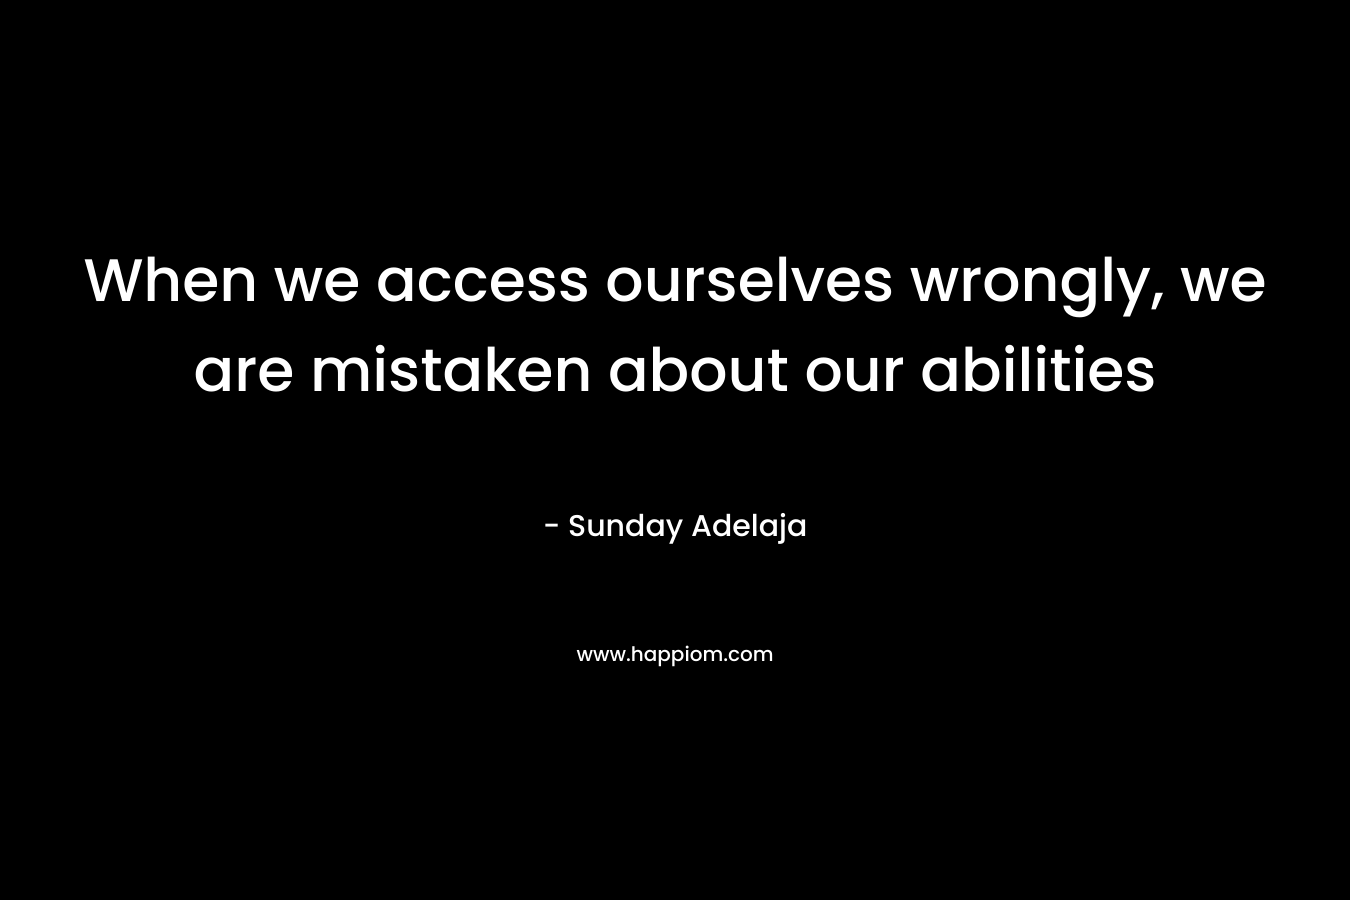 When we access ourselves wrongly, we are mistaken about our abilities